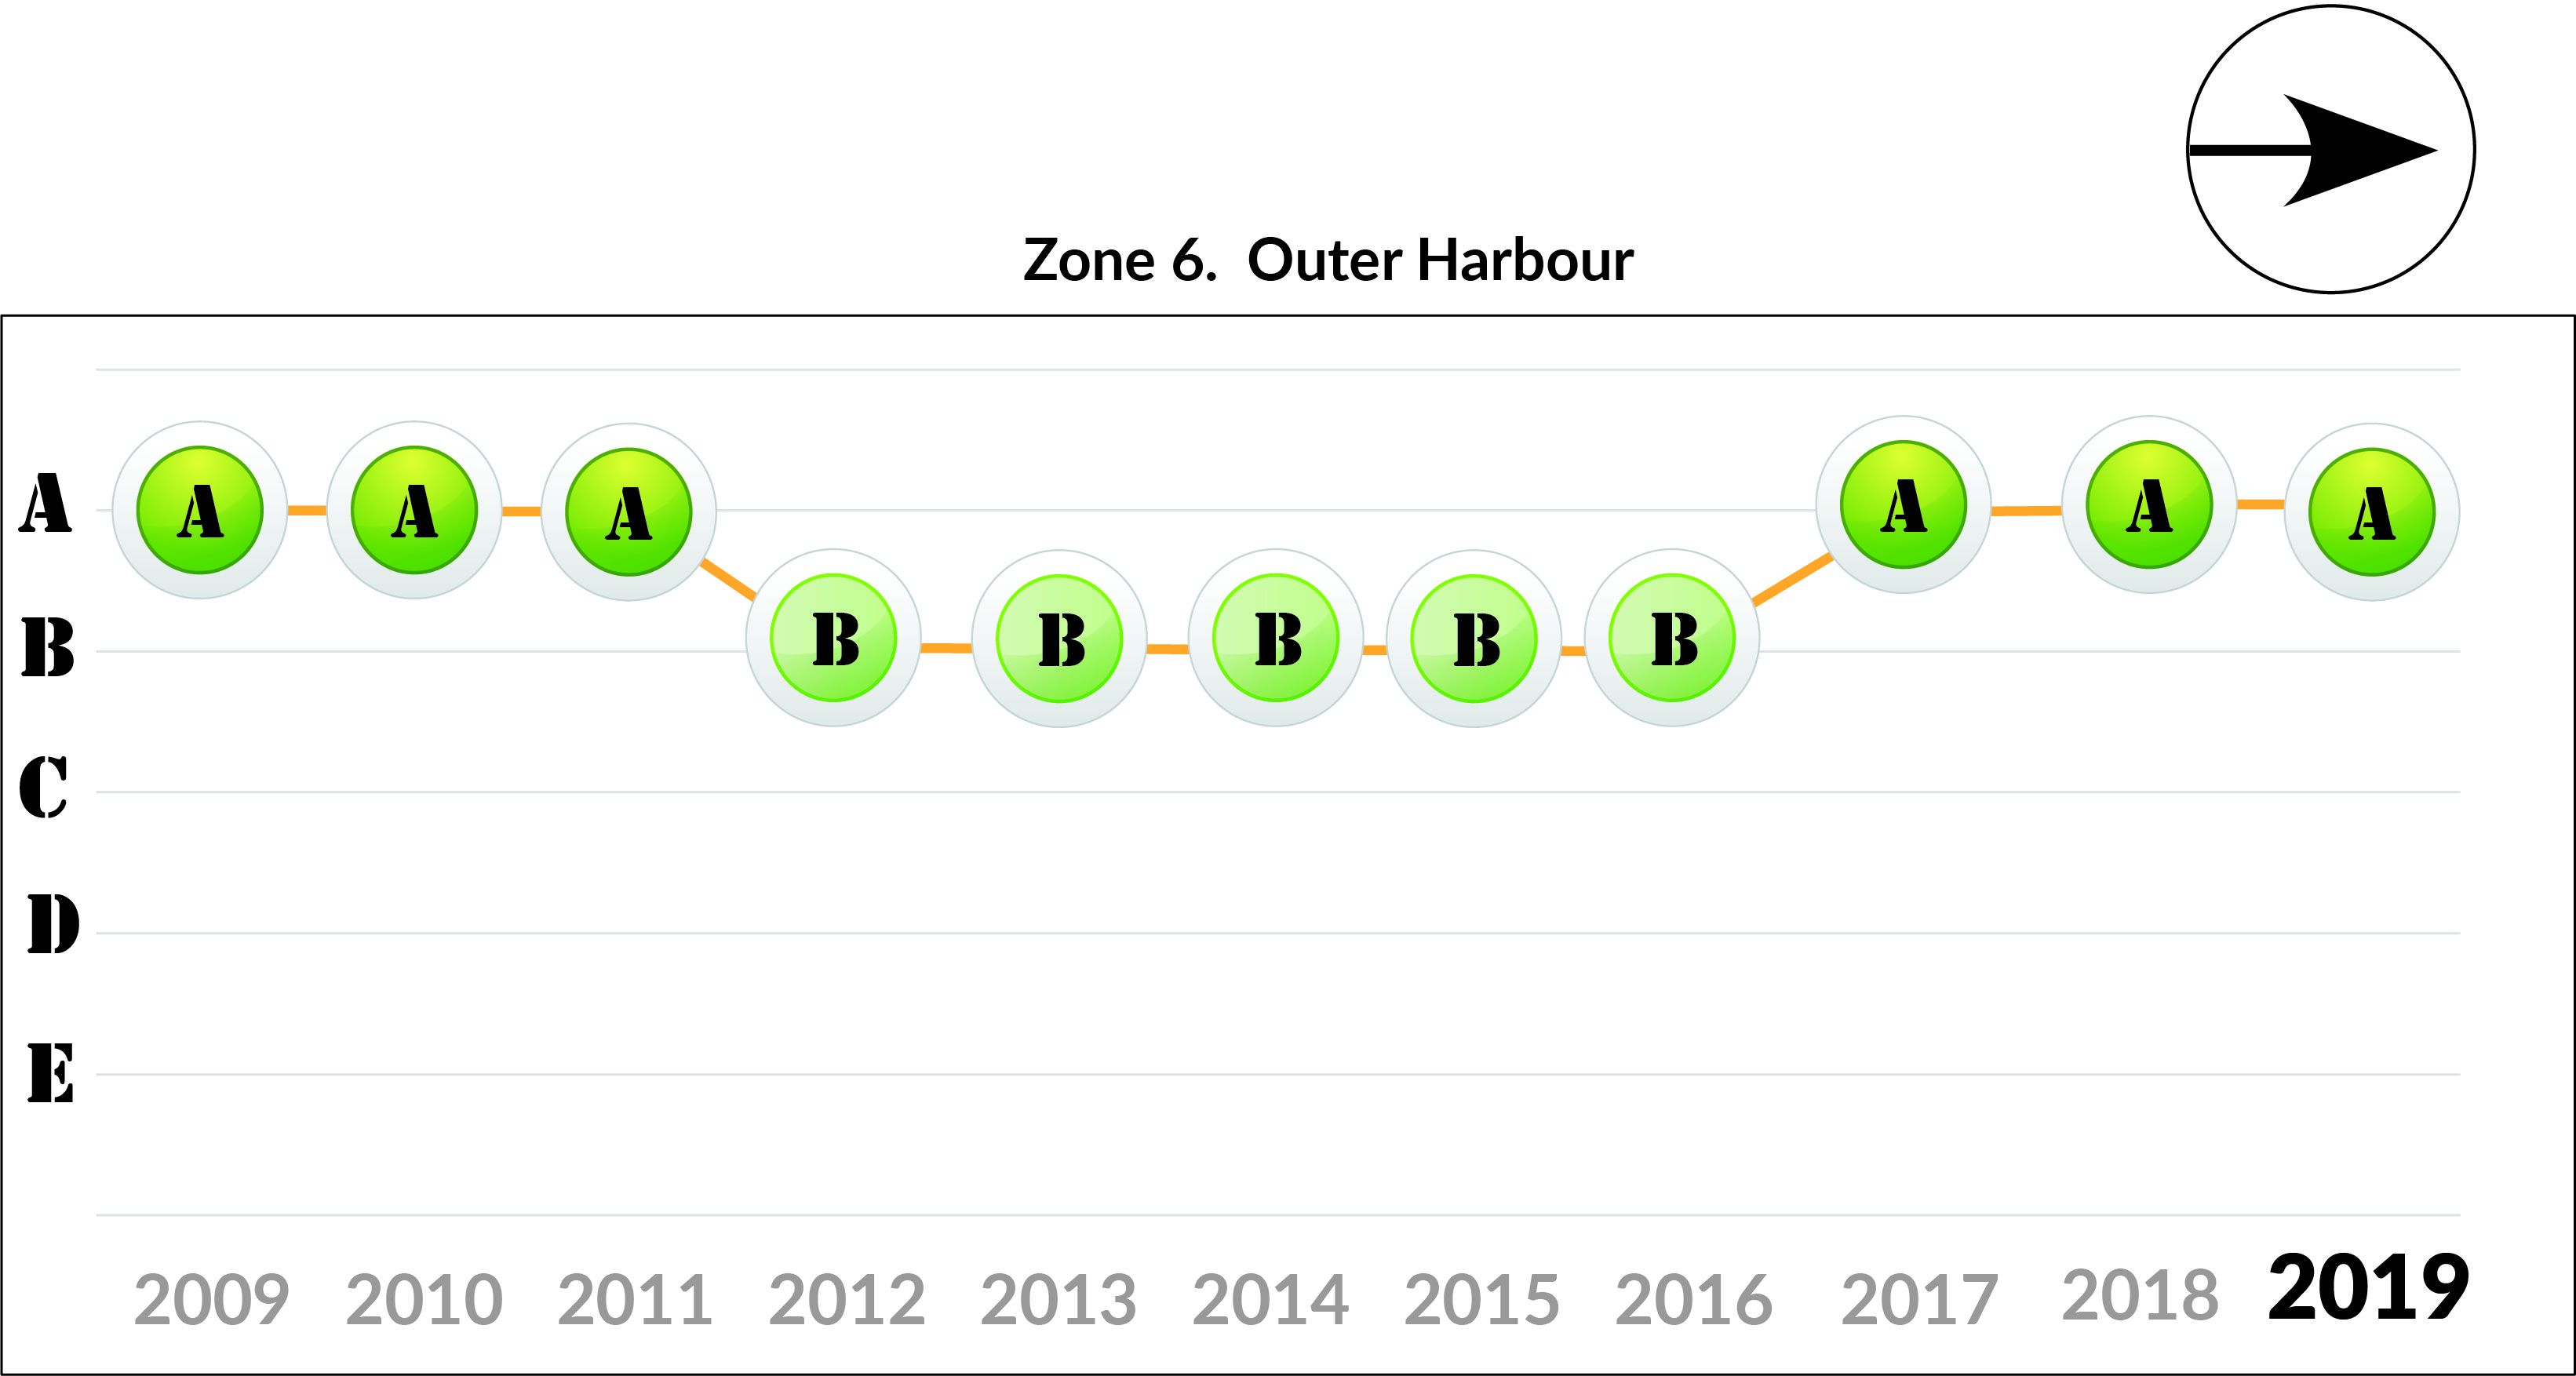 Zone 6 Outer Harbour trends